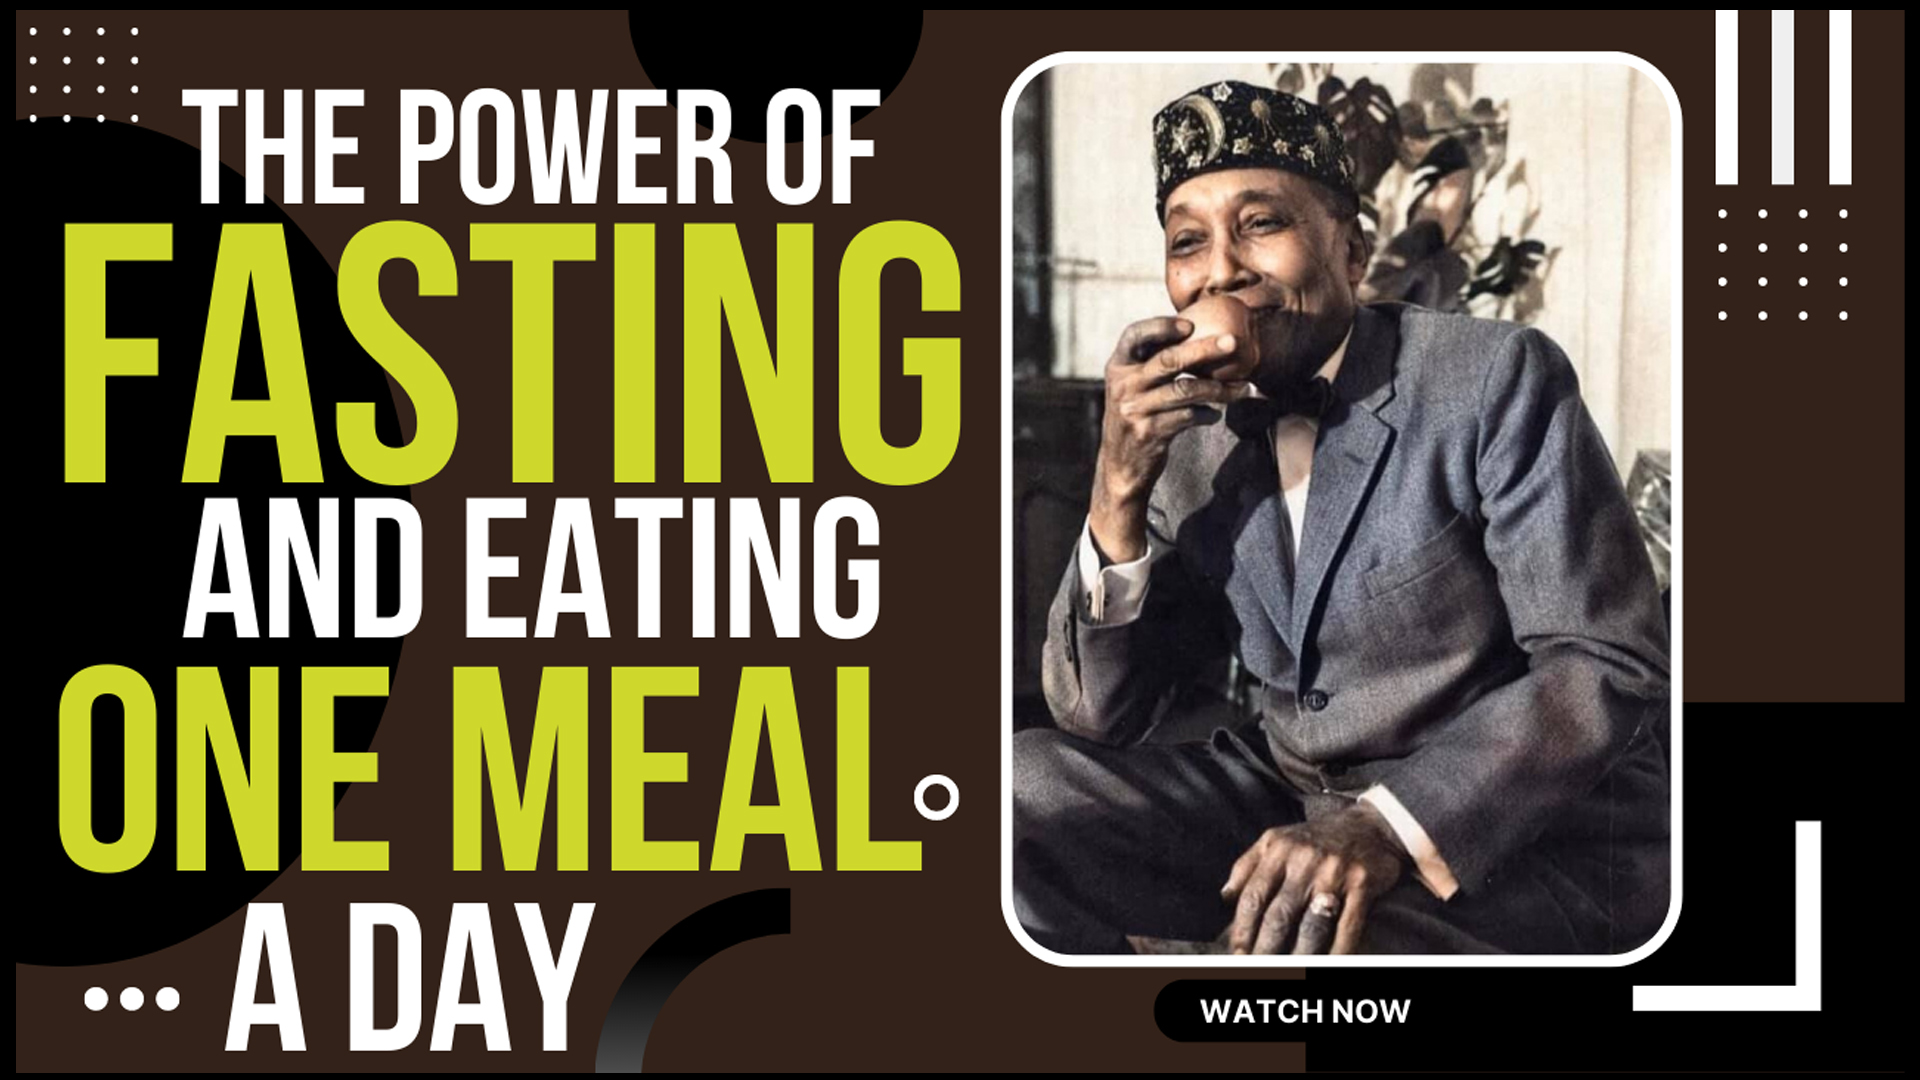 The Power of Fasting and Eating One Meal A Day